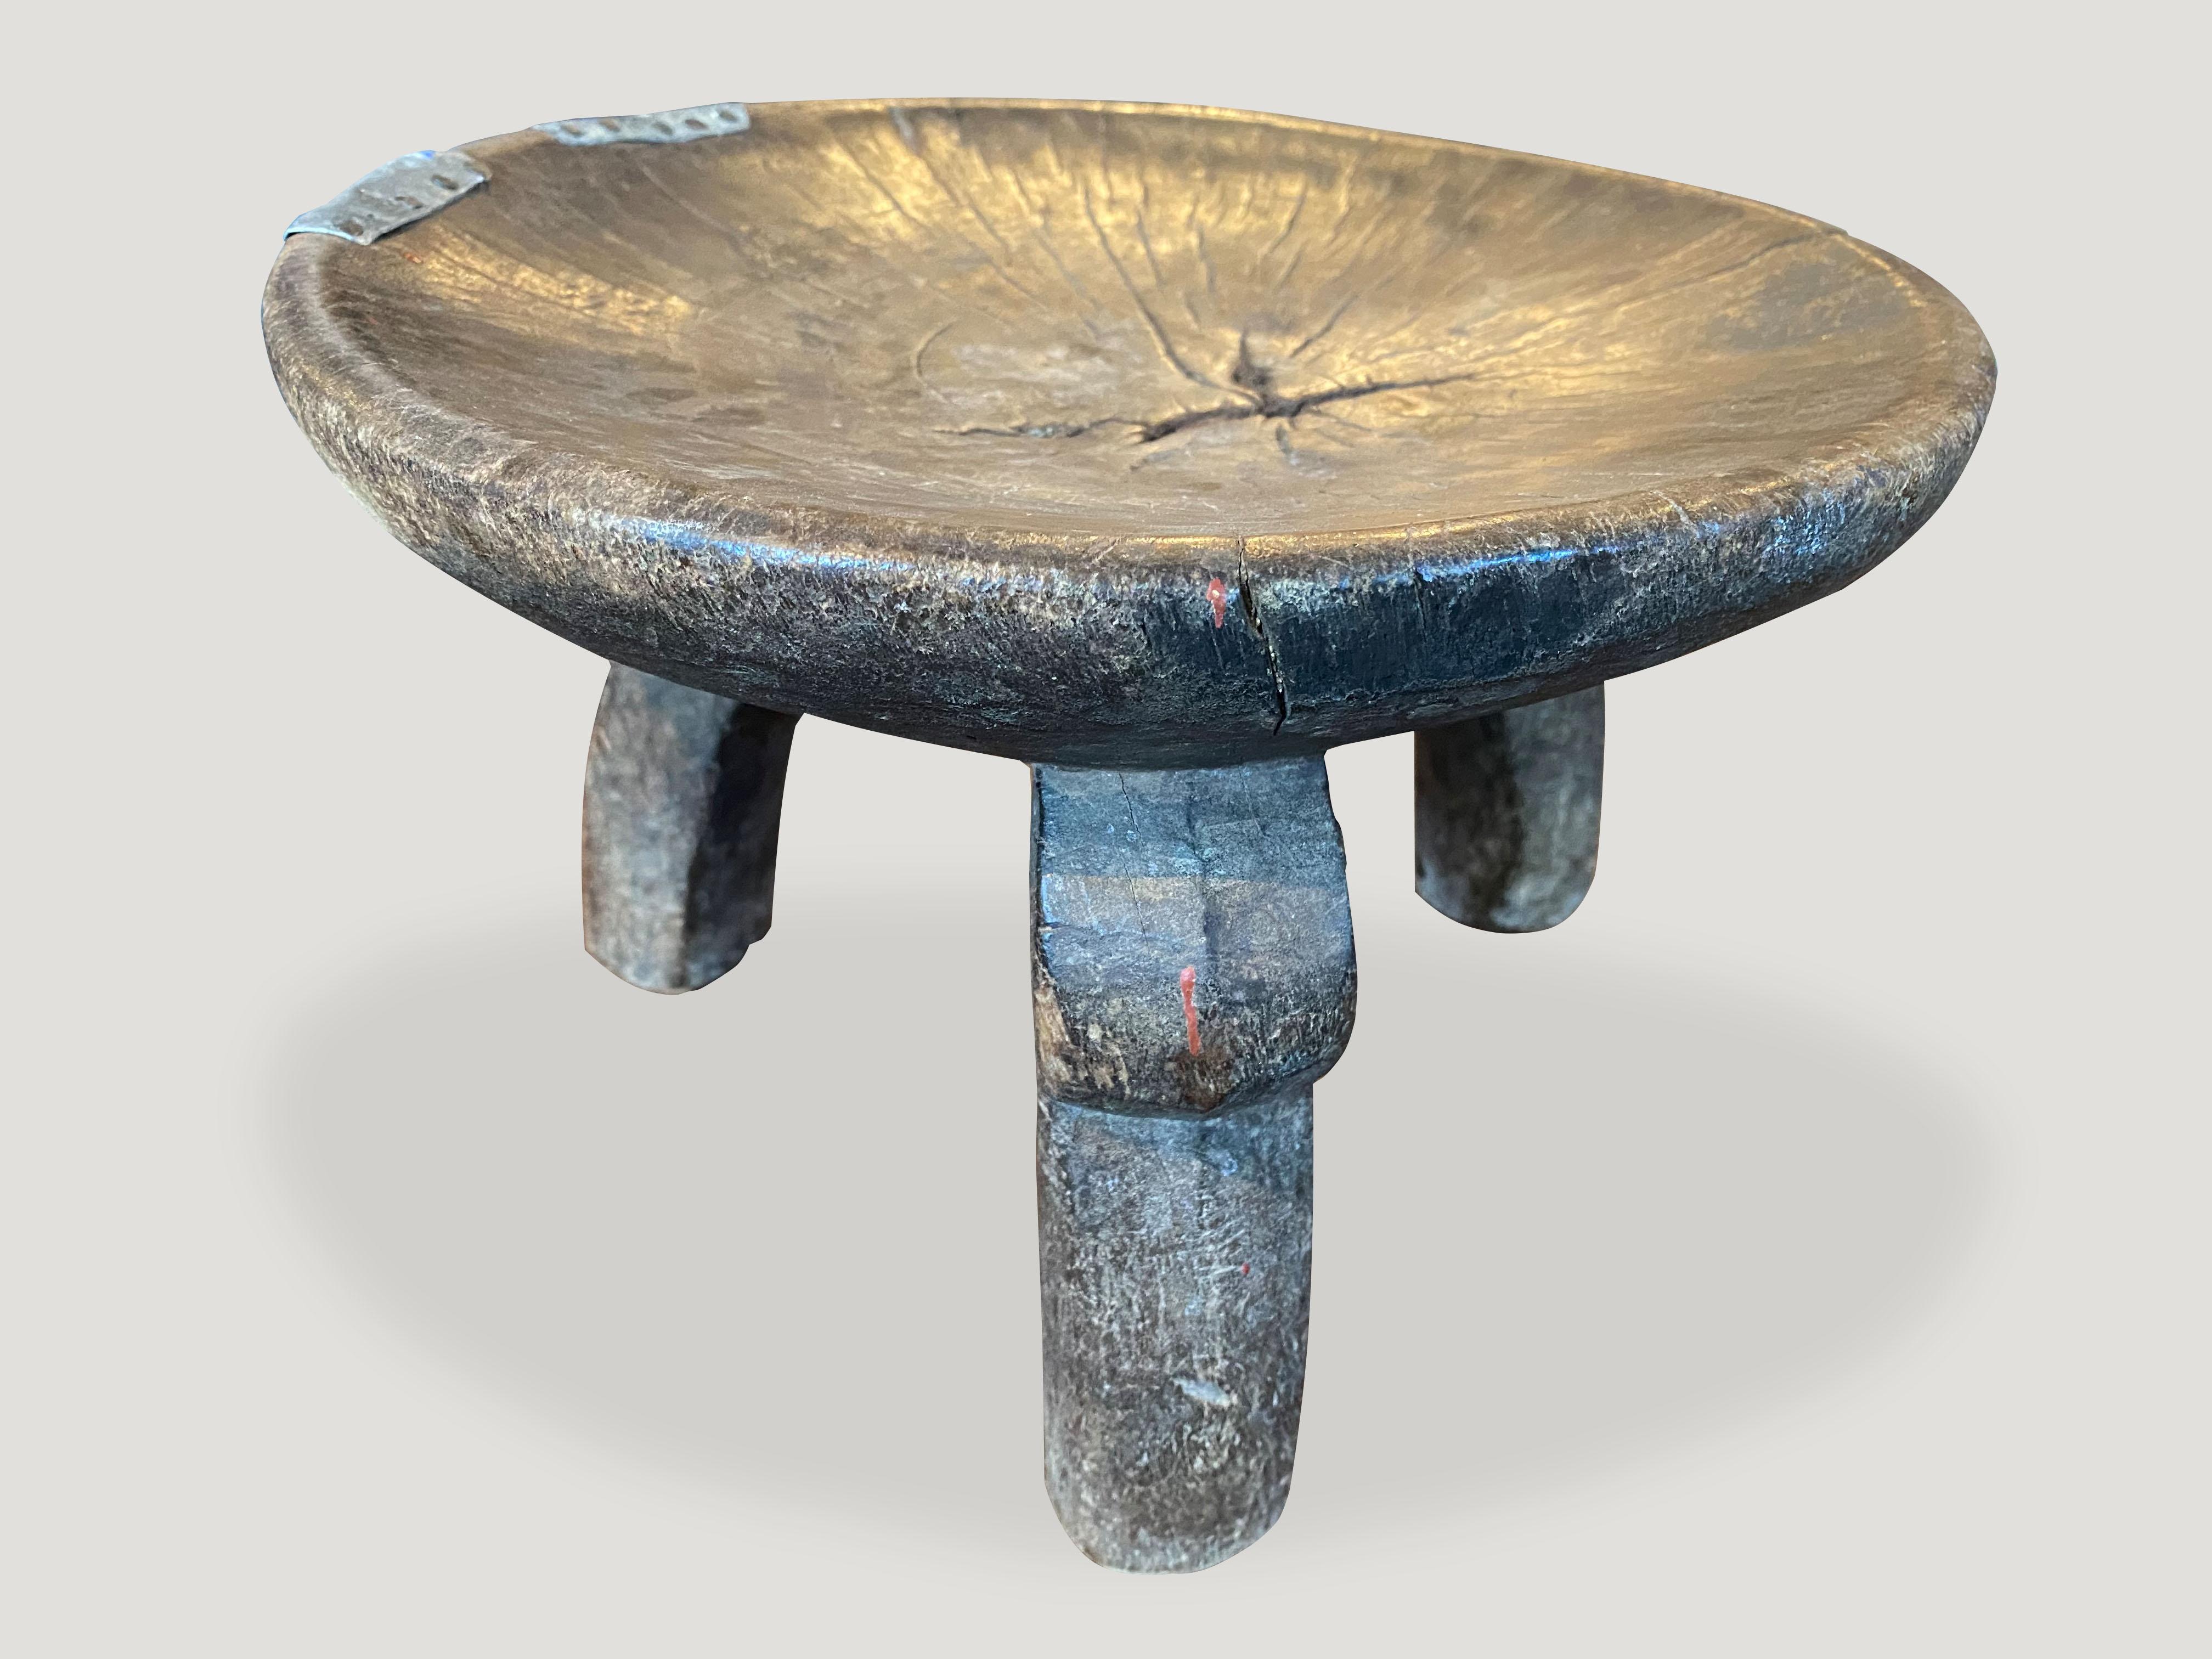 Tribal Andrianna Shamaris Antique African Stool, Side Table or Bowl For Sale